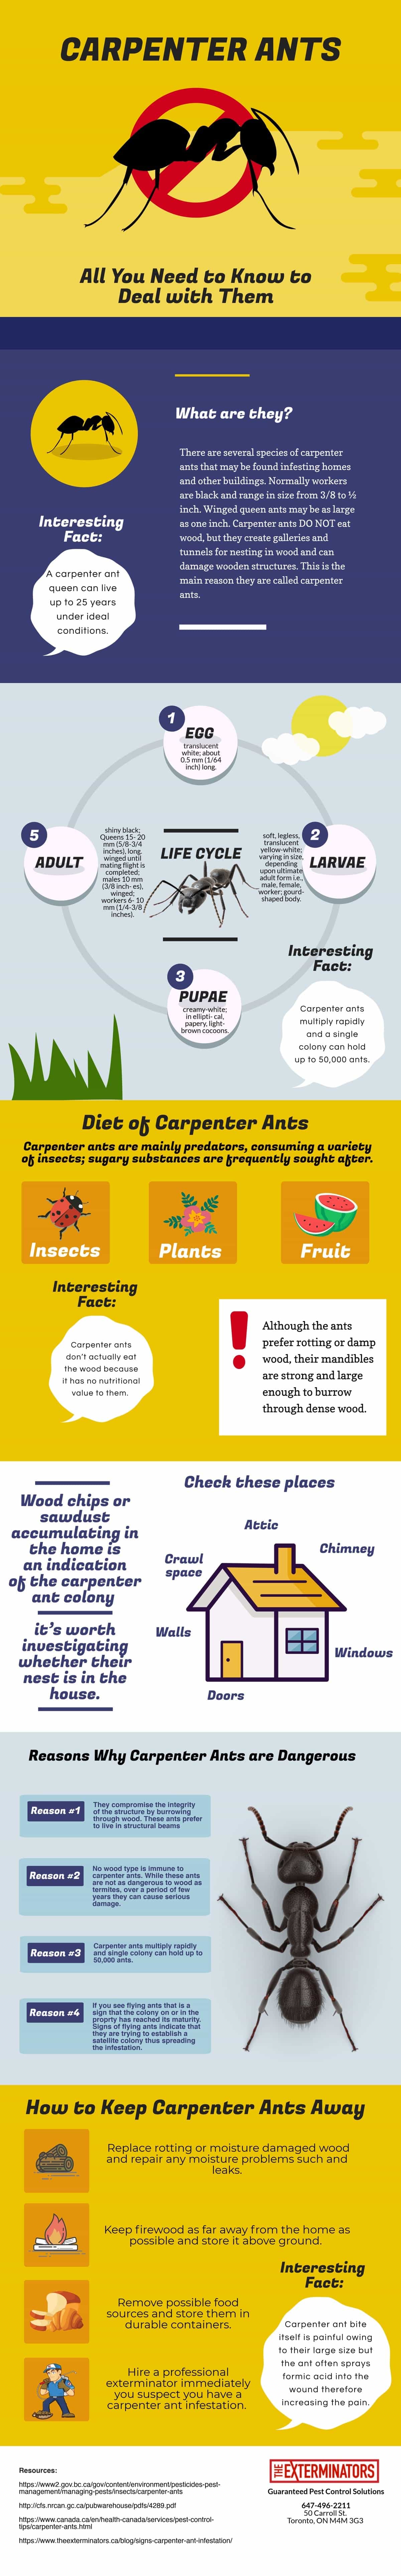 Carpenter Ants - All You Need to Know to Deal With Them